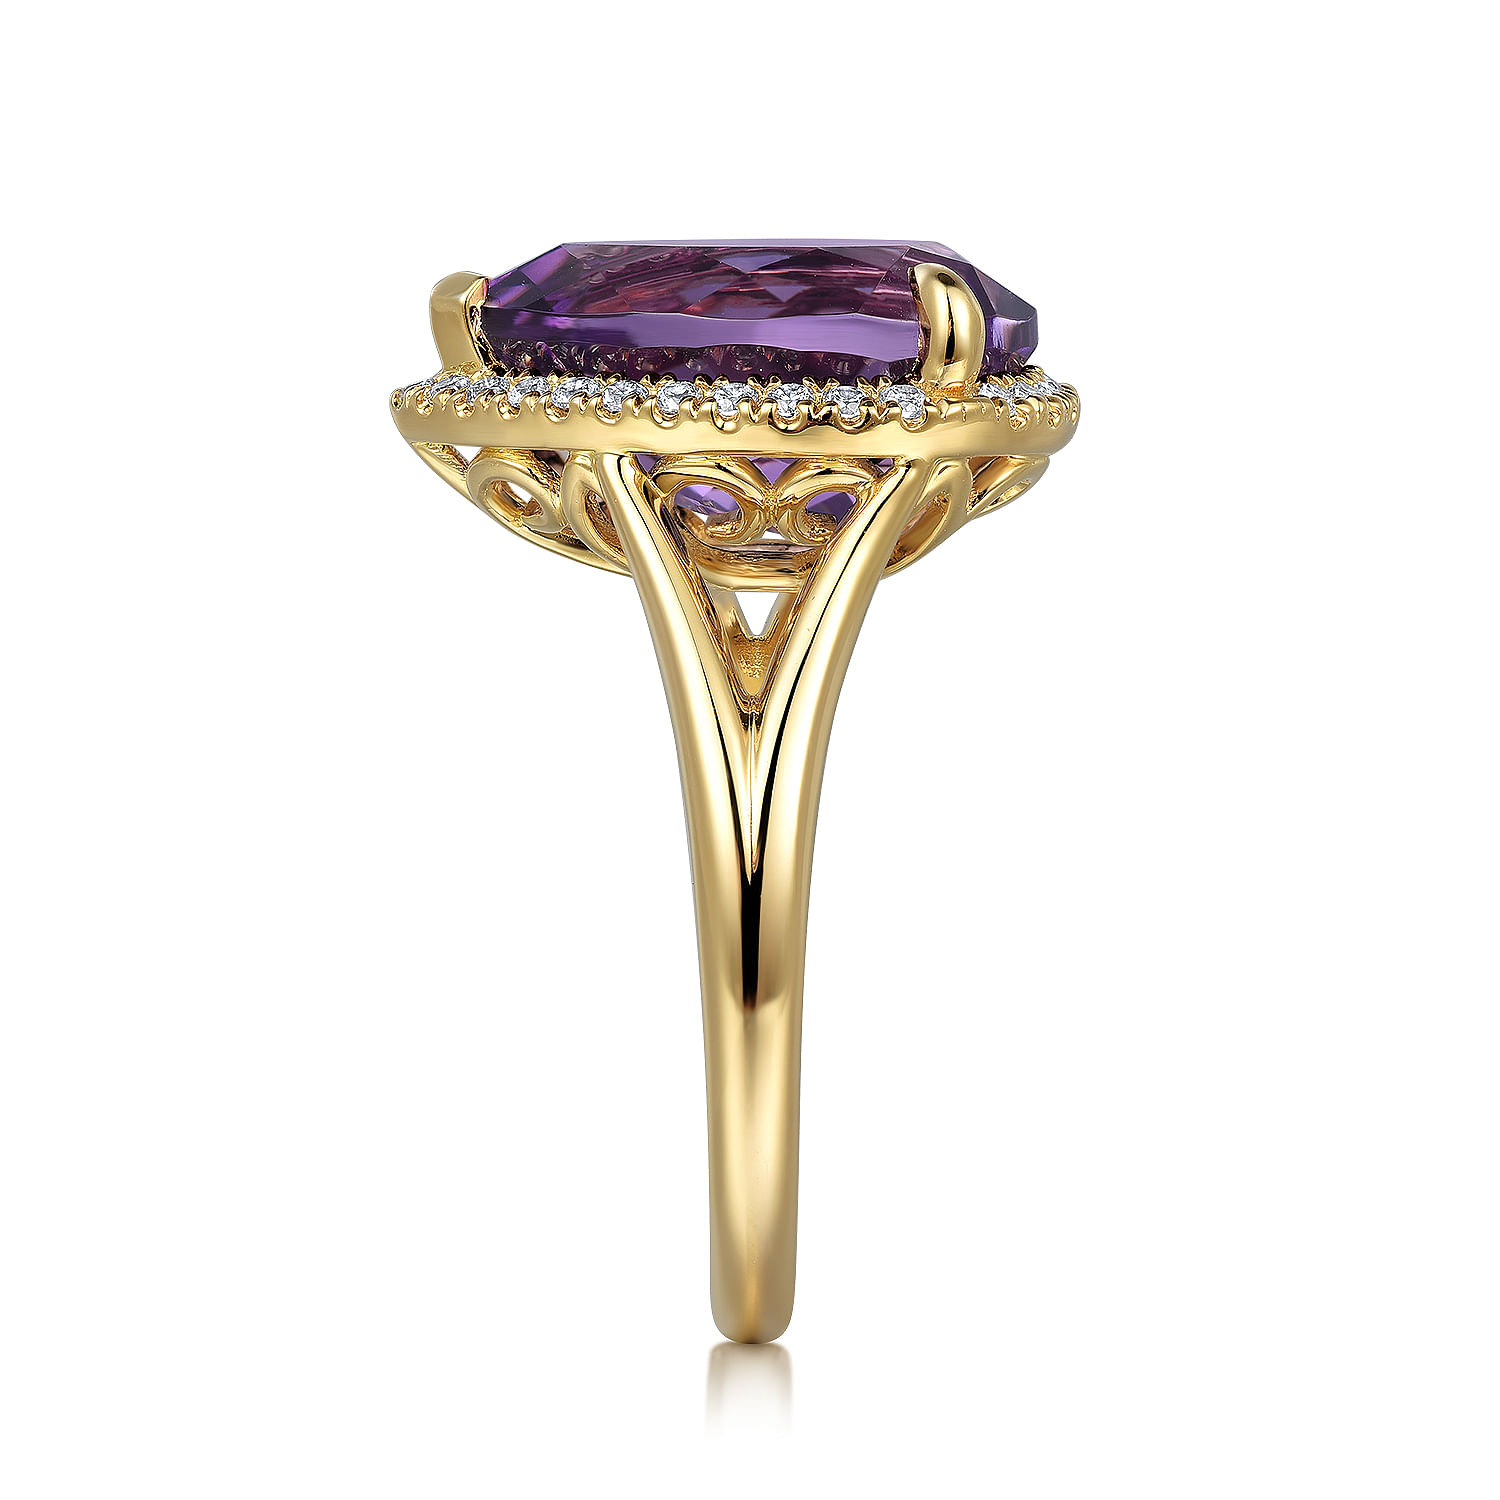 14K Yellow Gold Diamond and Flat Pear Shape Amethyst Ladies Ring With Flower Pattern Gallery - 0.21 ct - Shot 4